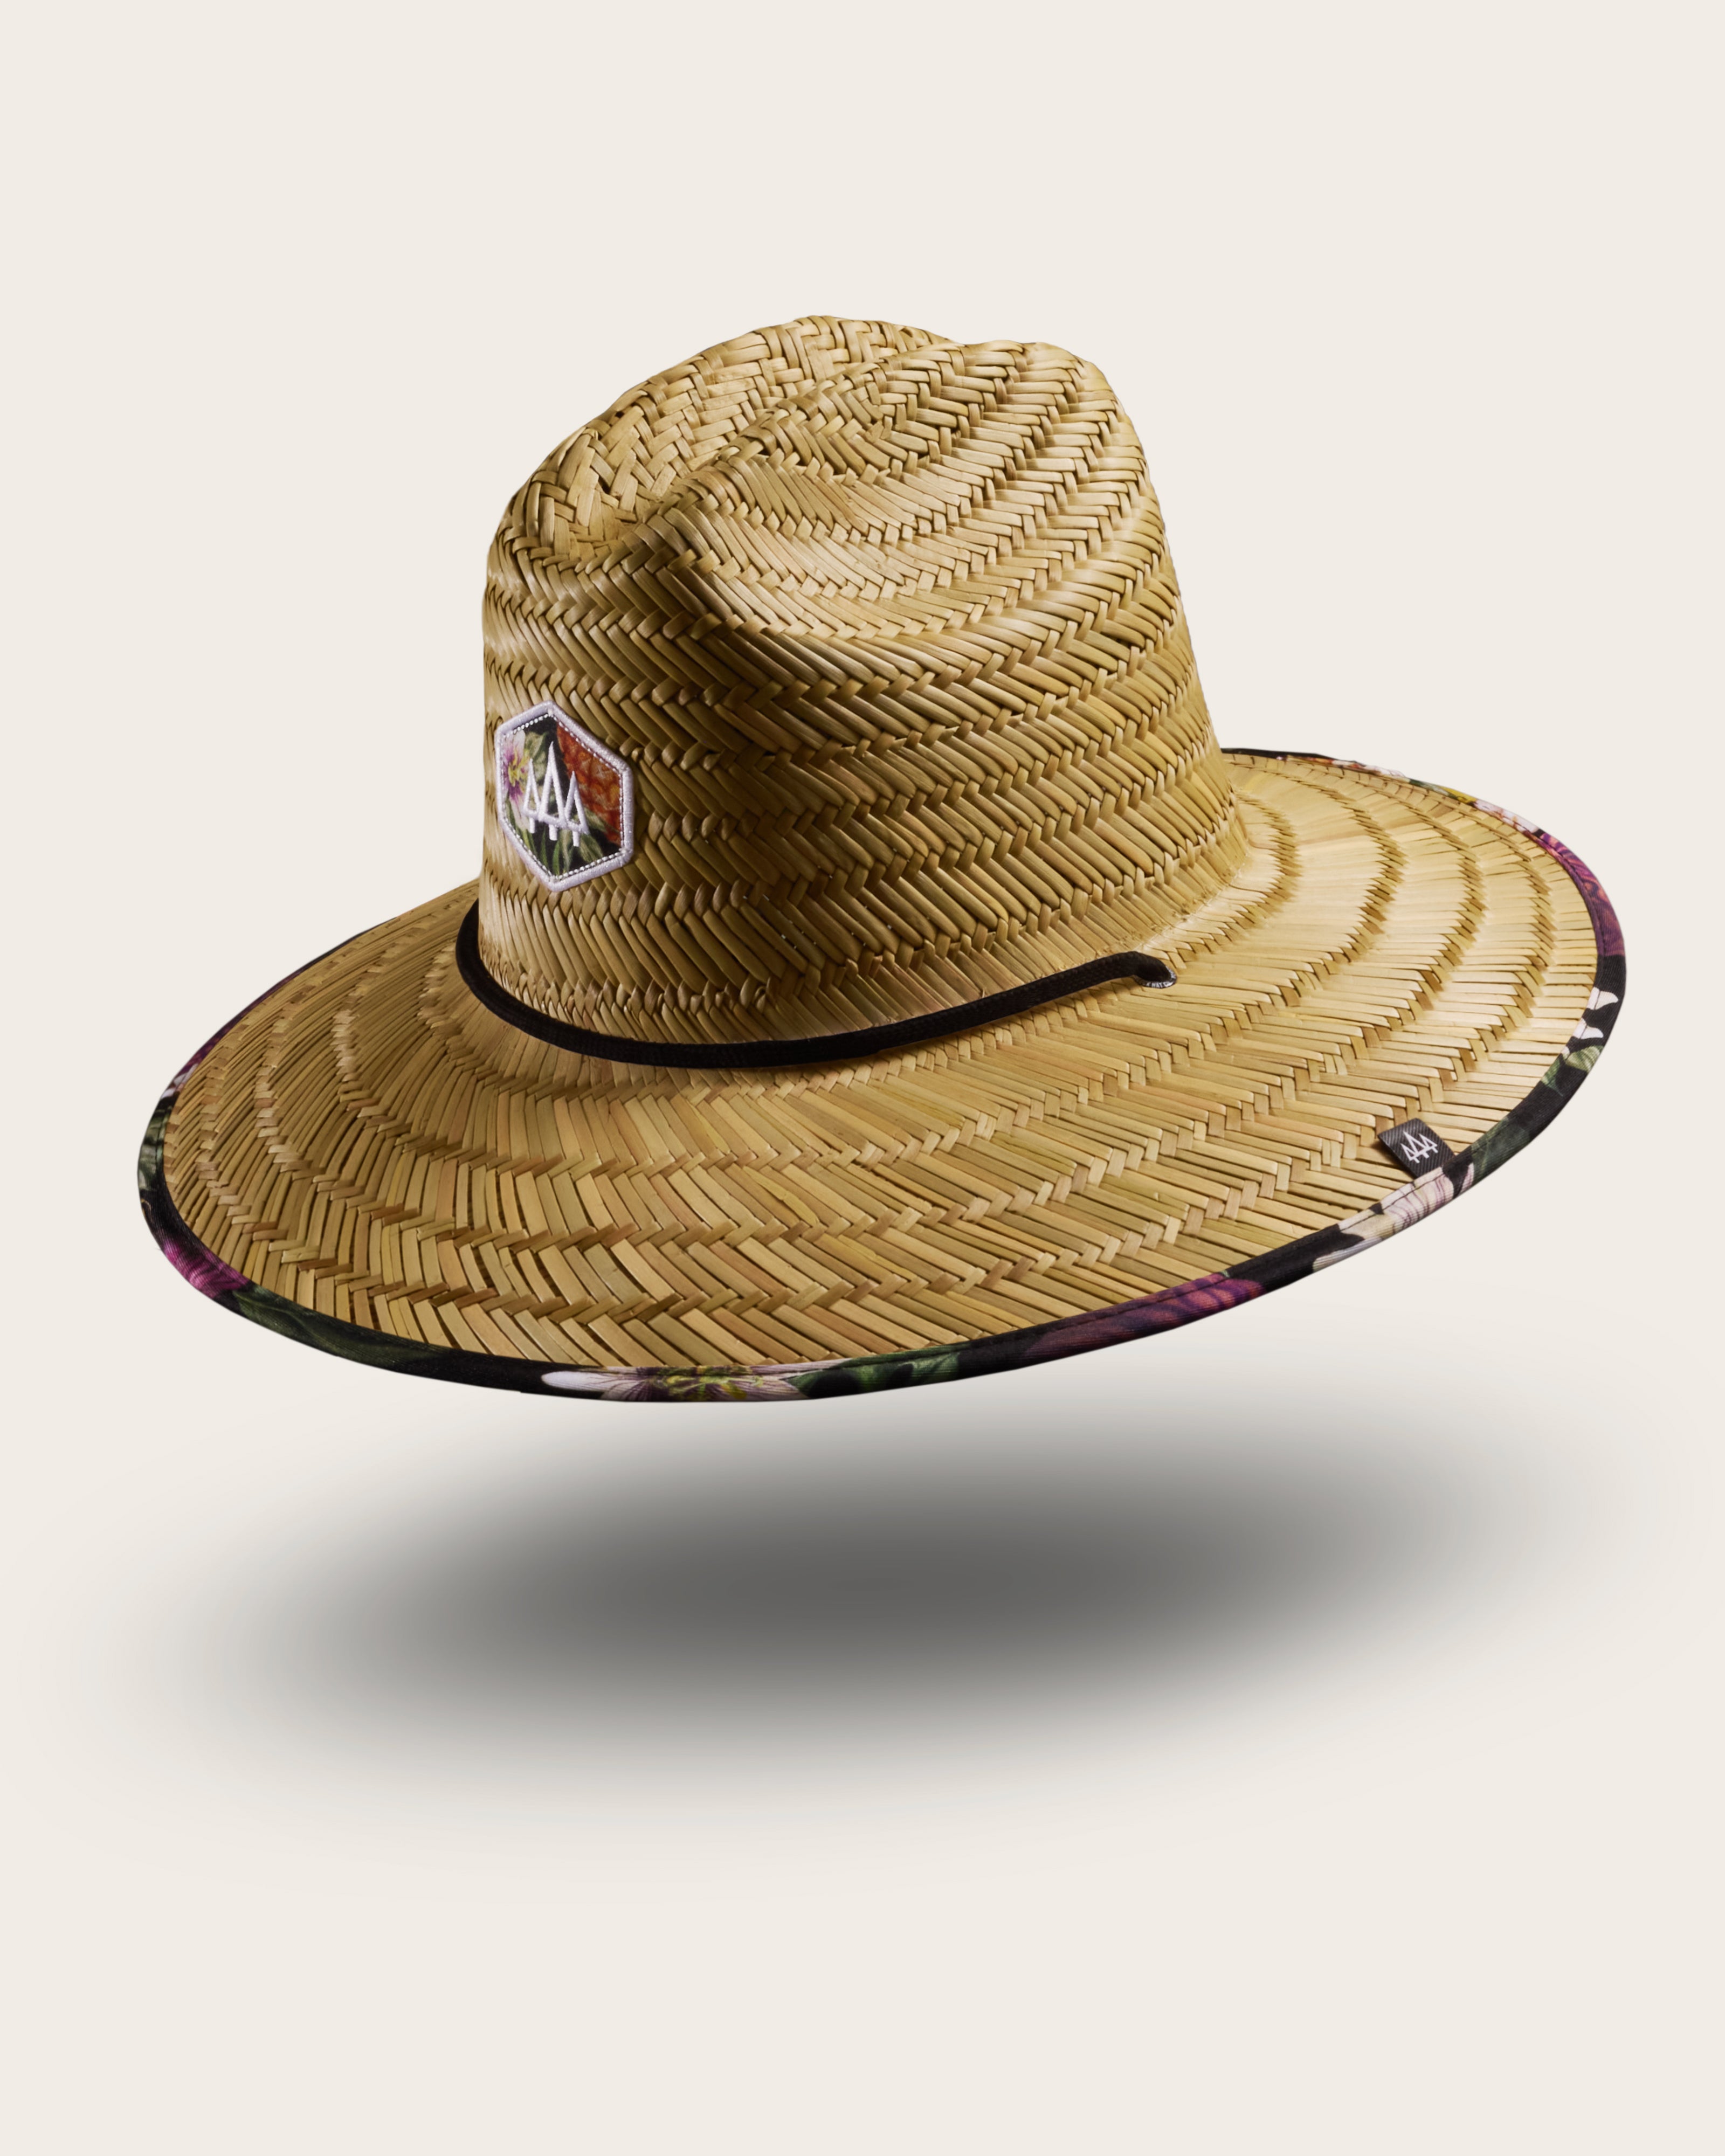 Hemlock Nightcap straw lifeguard hat with pineapple pattern with patch